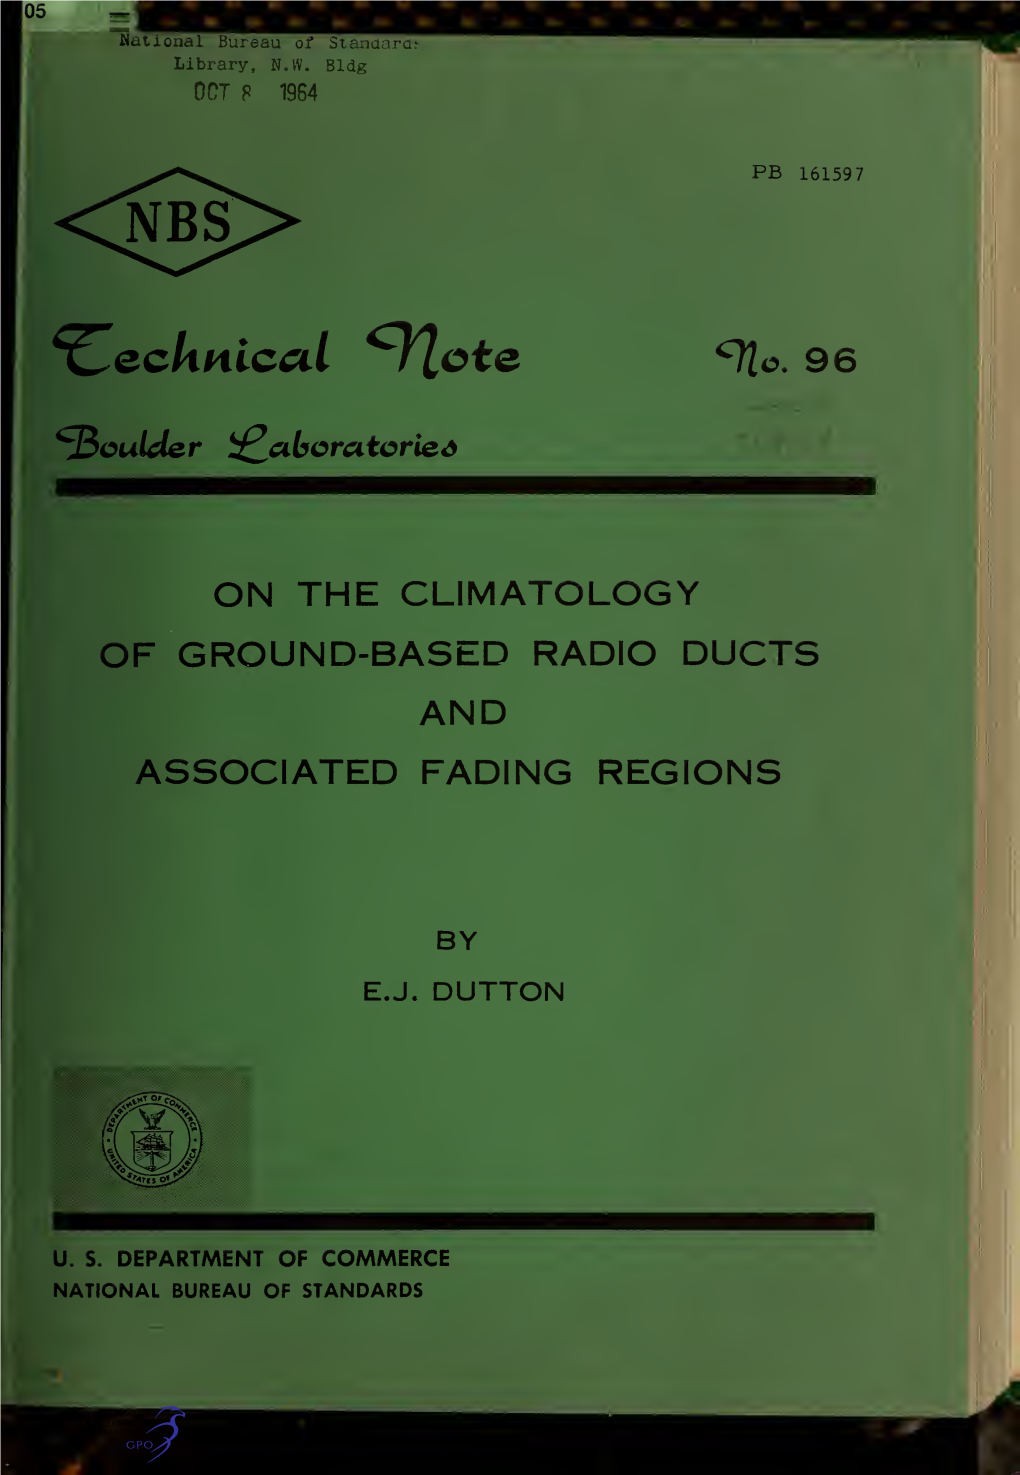 On the Climatology of Ground-Based Radio Ducts and Associated Fading Regions